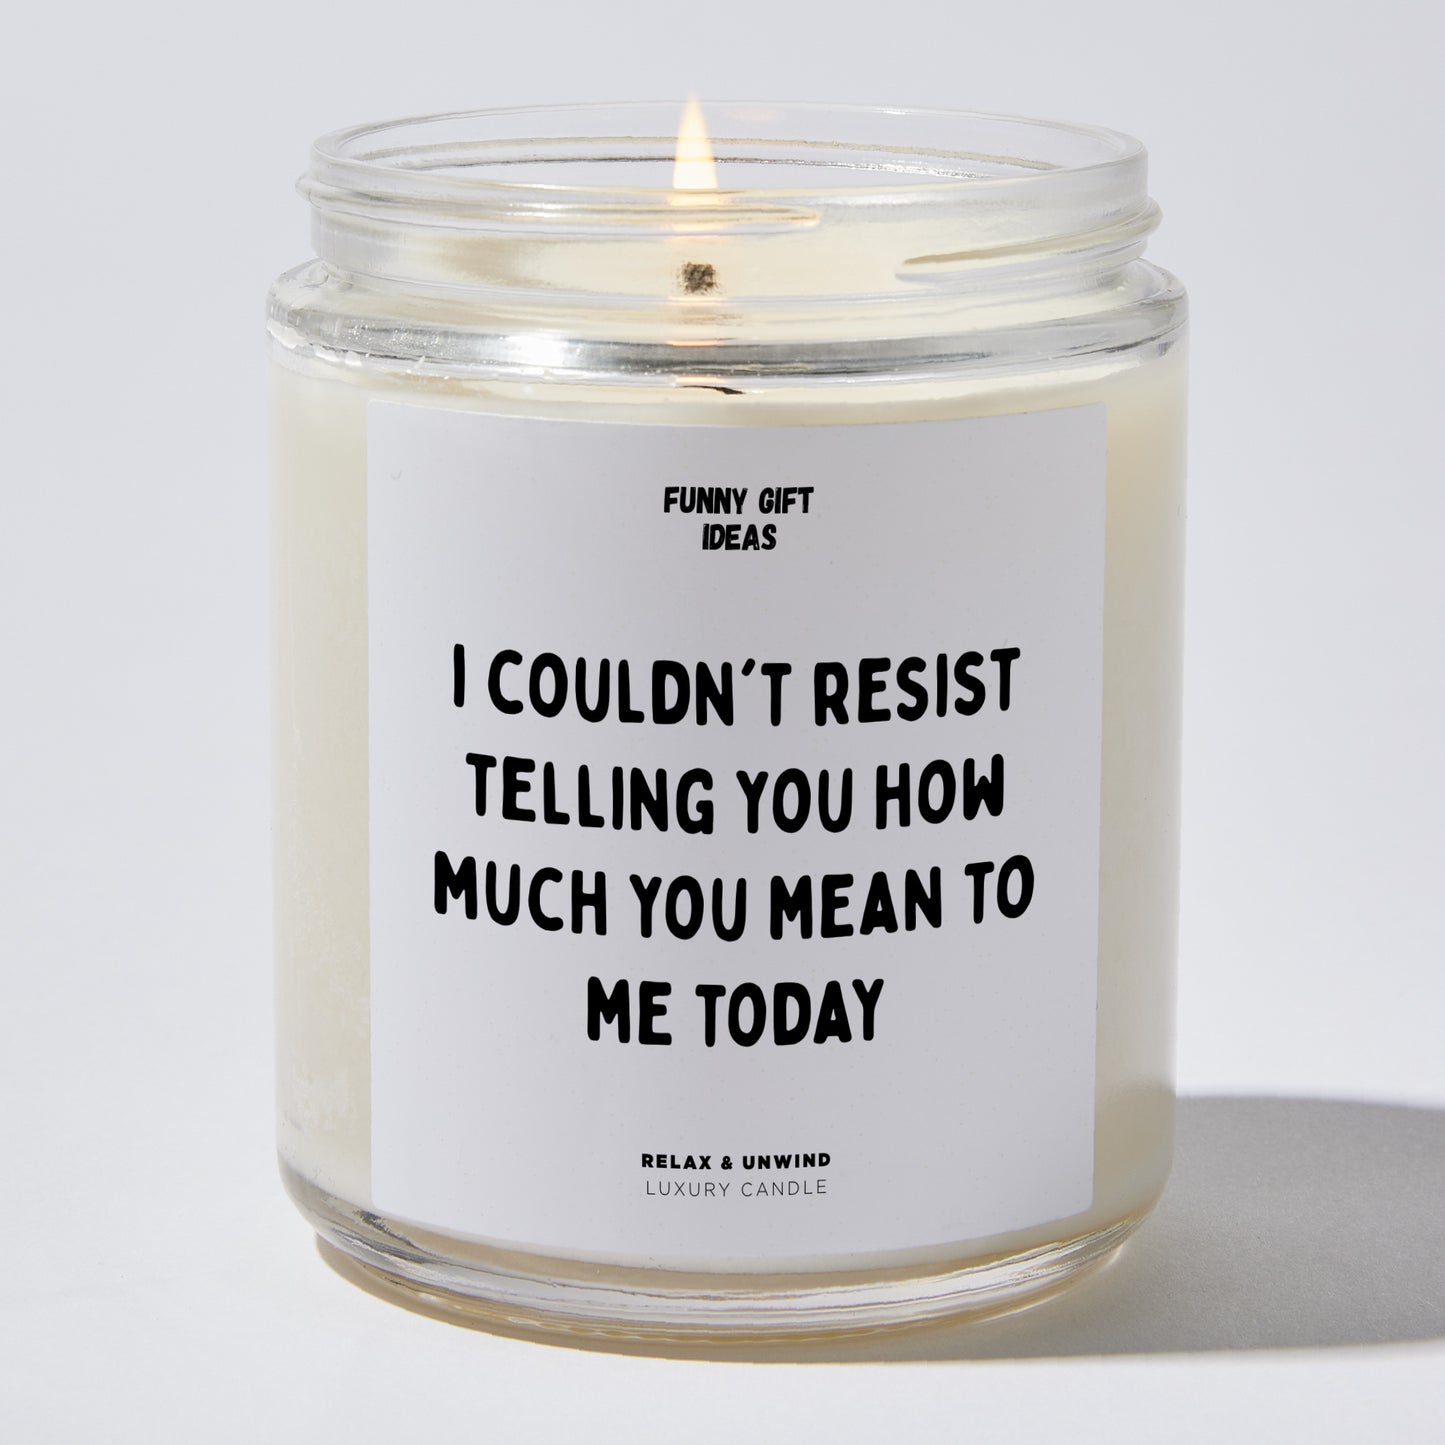 Anniversary Present - I Couldn't Resist Telling You How Much You Mean to Me Today. - Candle